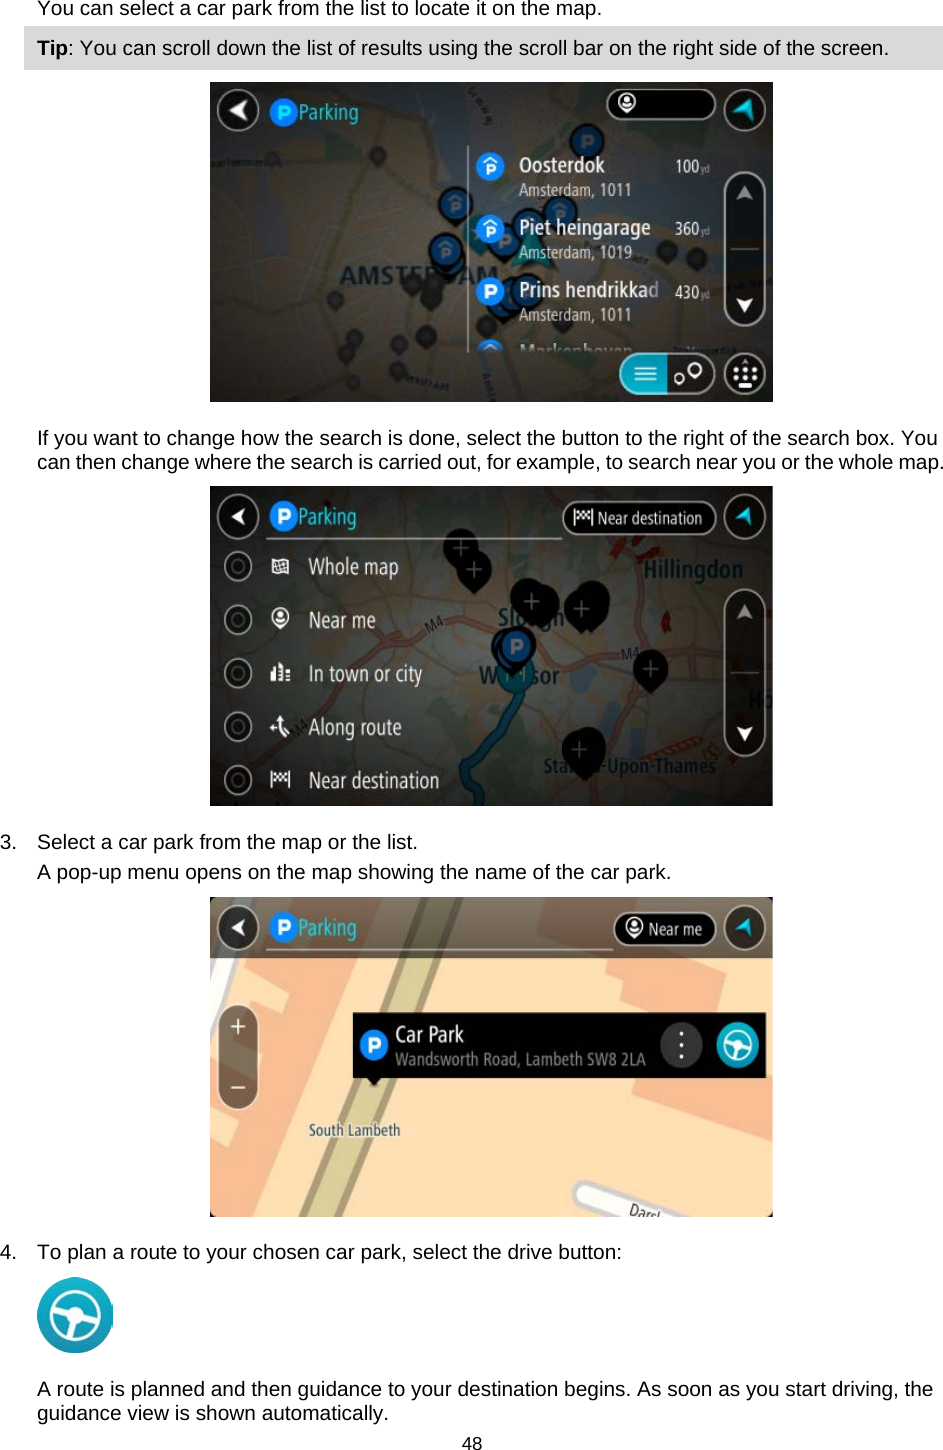  You can select a car park from the list to locate it on the map. Tip: You can scroll down the list of results using the scroll bar on the right side of the screen.  If you want to change how the search is done, select the button to the right of the search box. You can then change where the search is carried out, for example, to search near you or the whole map.    3. Select a car park from the map or the list. A pop-up menu opens on the map showing the name of the car park.  4. To plan a route to your chosen car park, select the drive button:  A route is planned and then guidance to your destination begins. As soon as you start driving, the guidance view is shown automatically. 48   